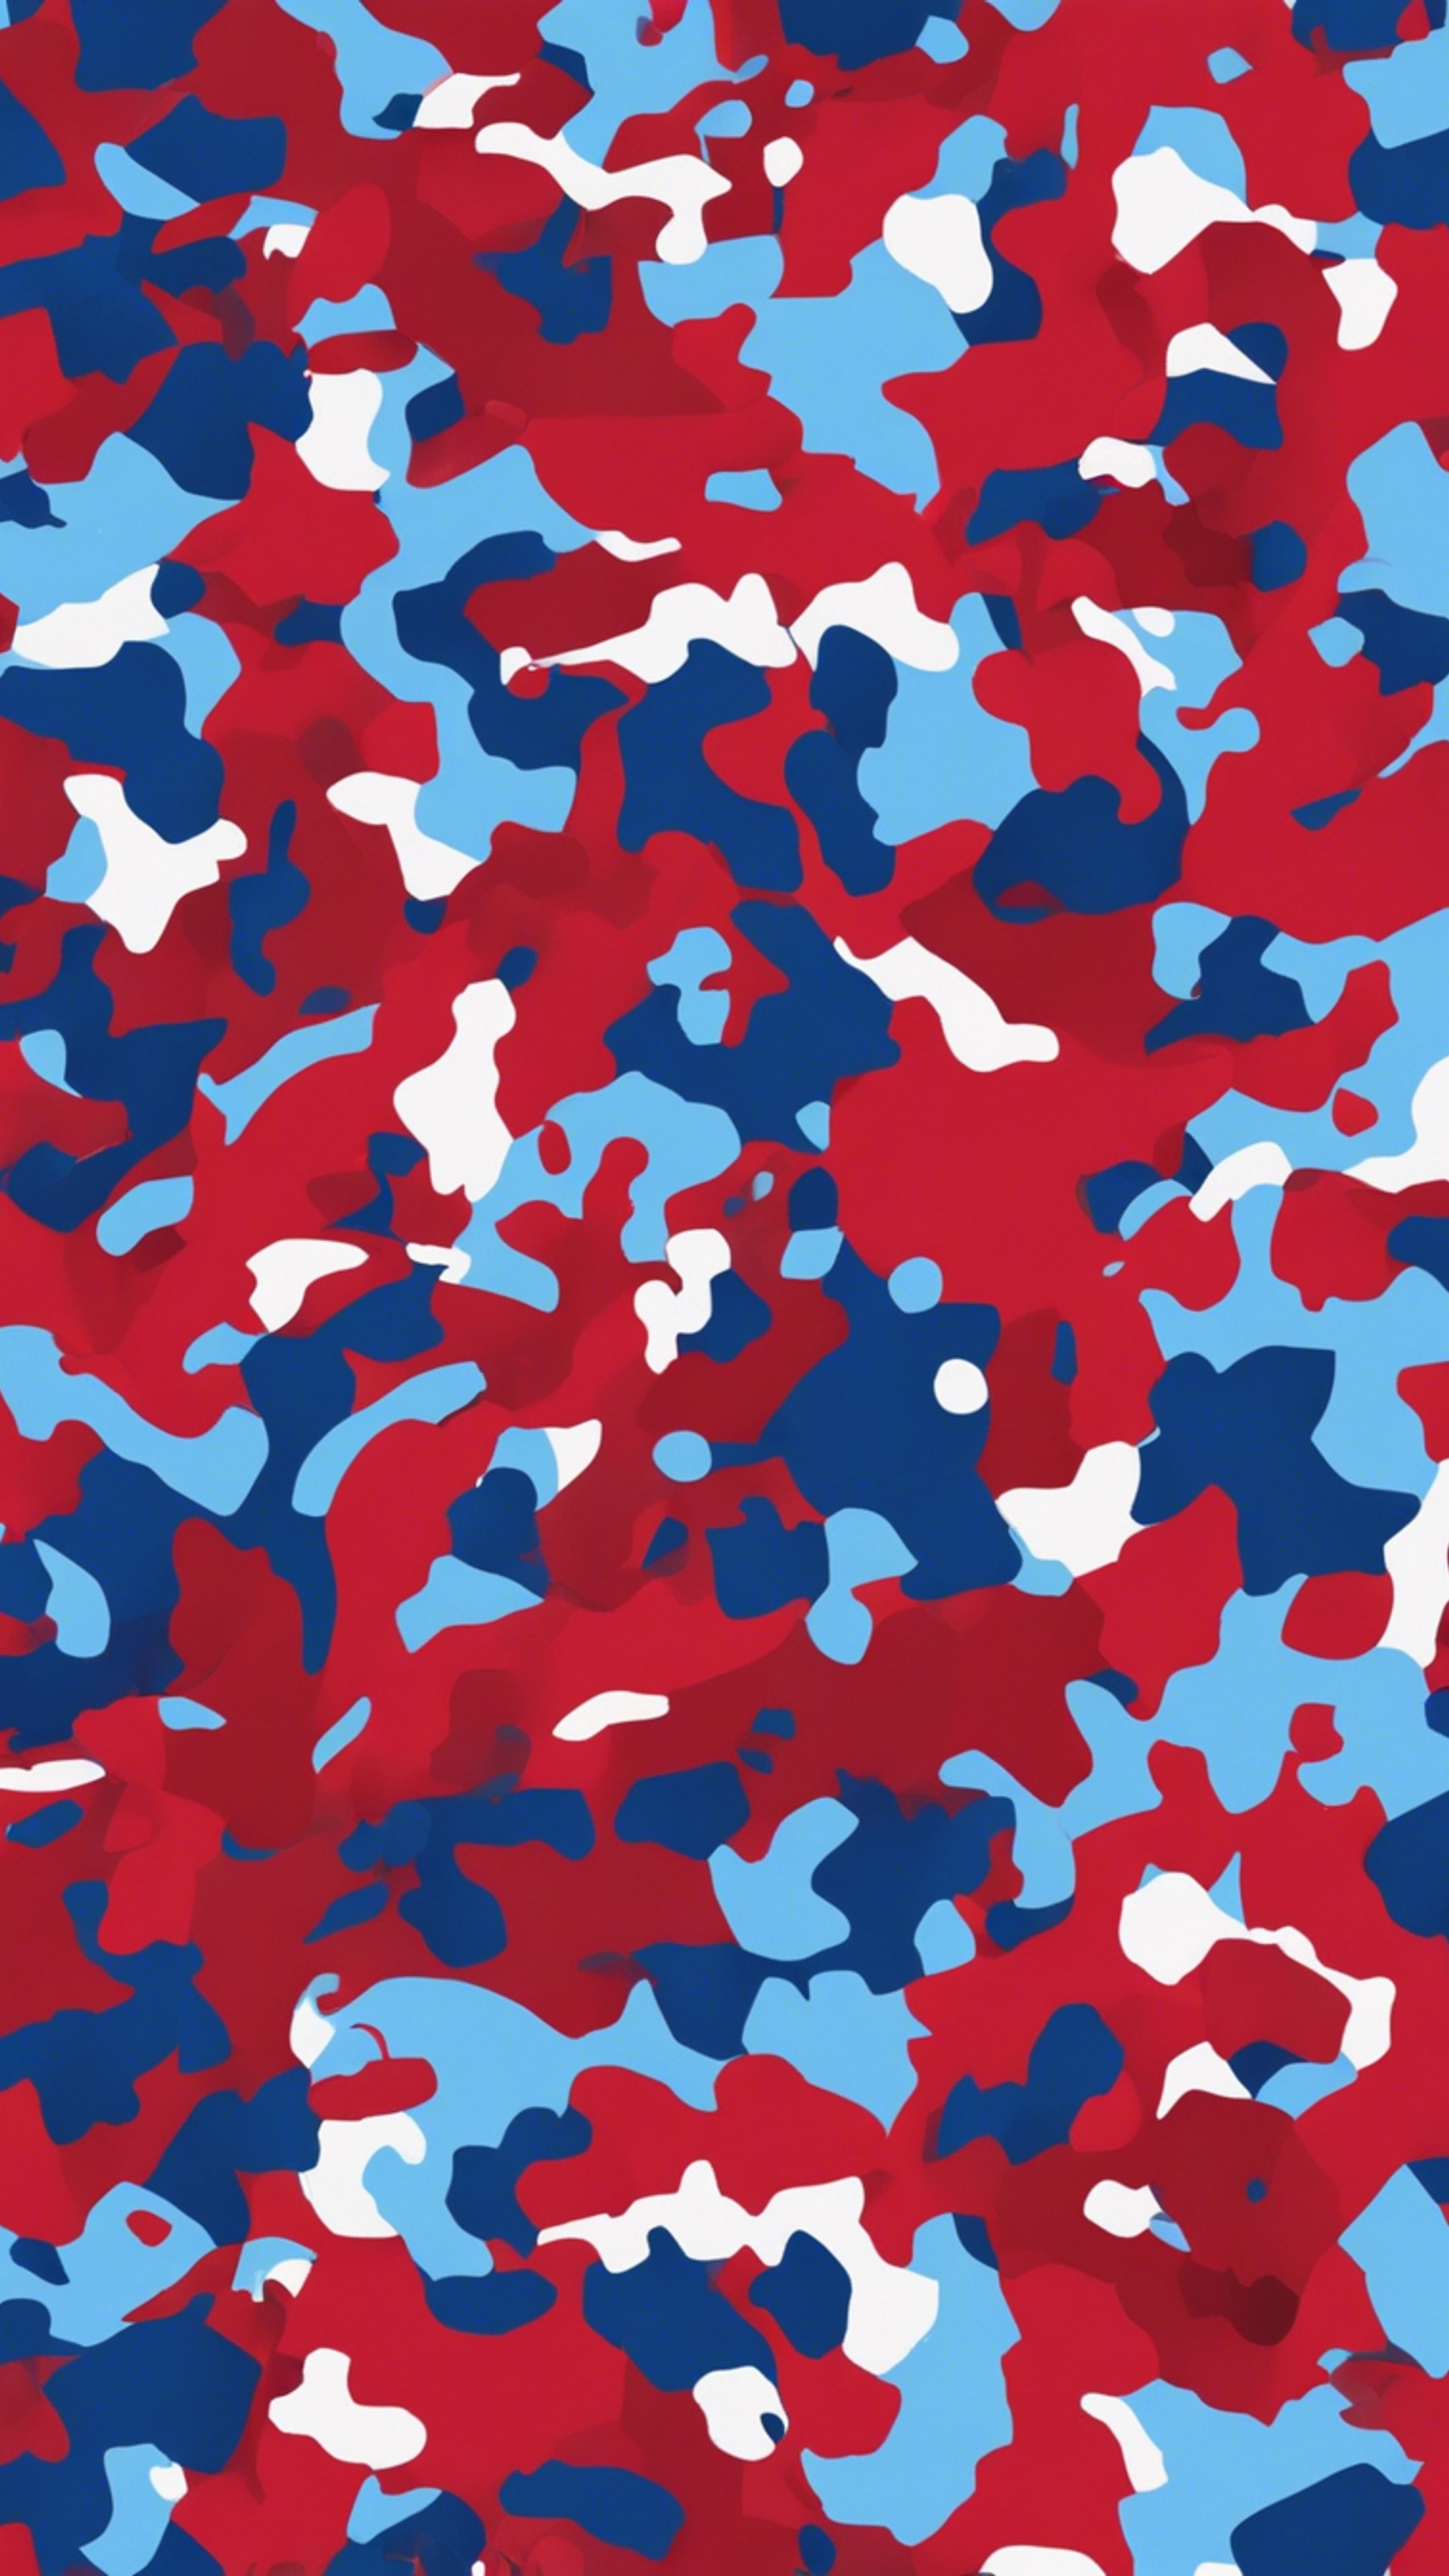 Camouflage pattern in shades of red and blue distributed randomly. Sfondo[29e12ceb4fee465f920c]